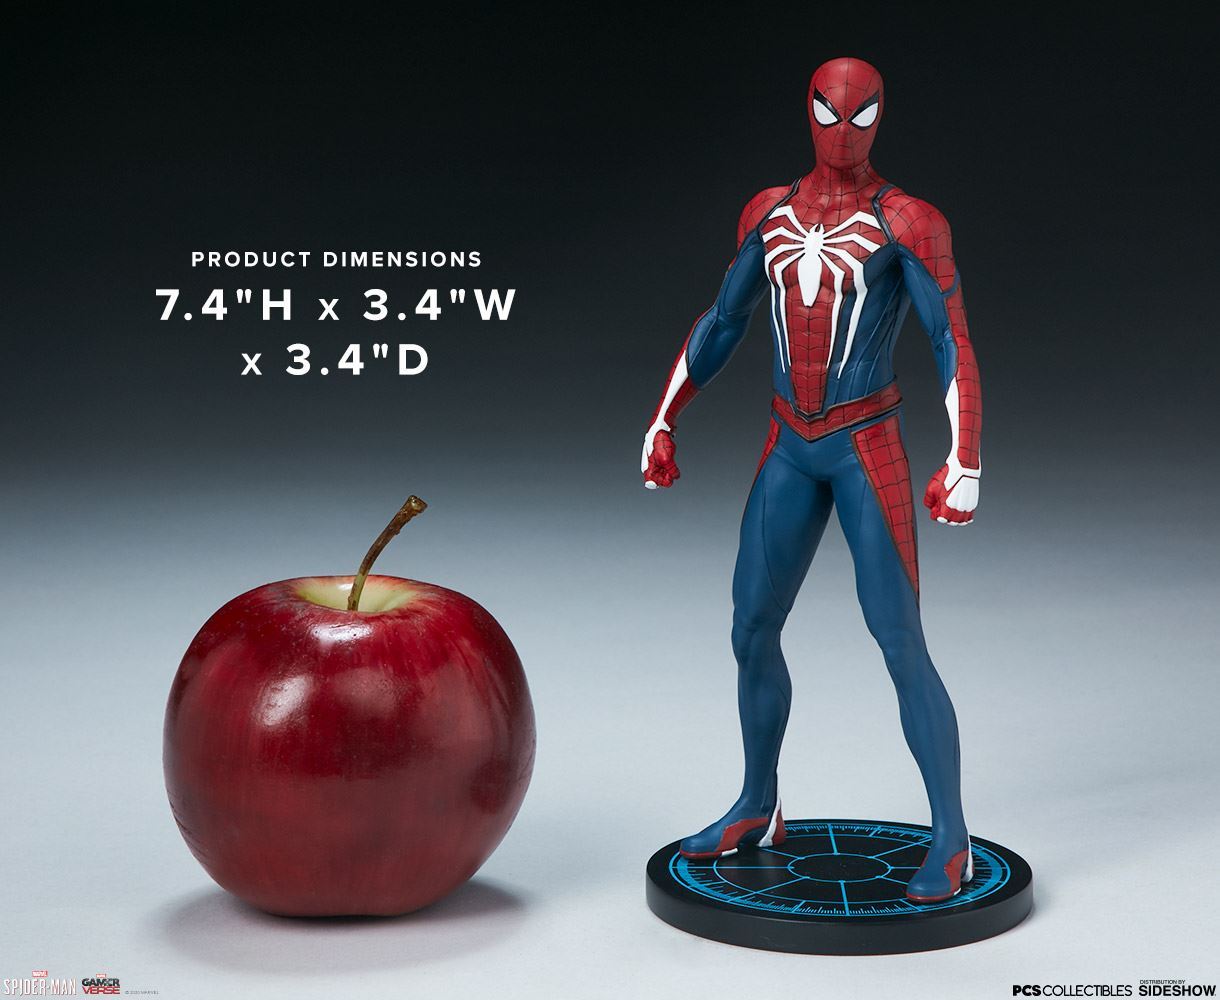 Pop Culture Shock Collectibles - Marvel's Spider-Man (1/10 Scale)